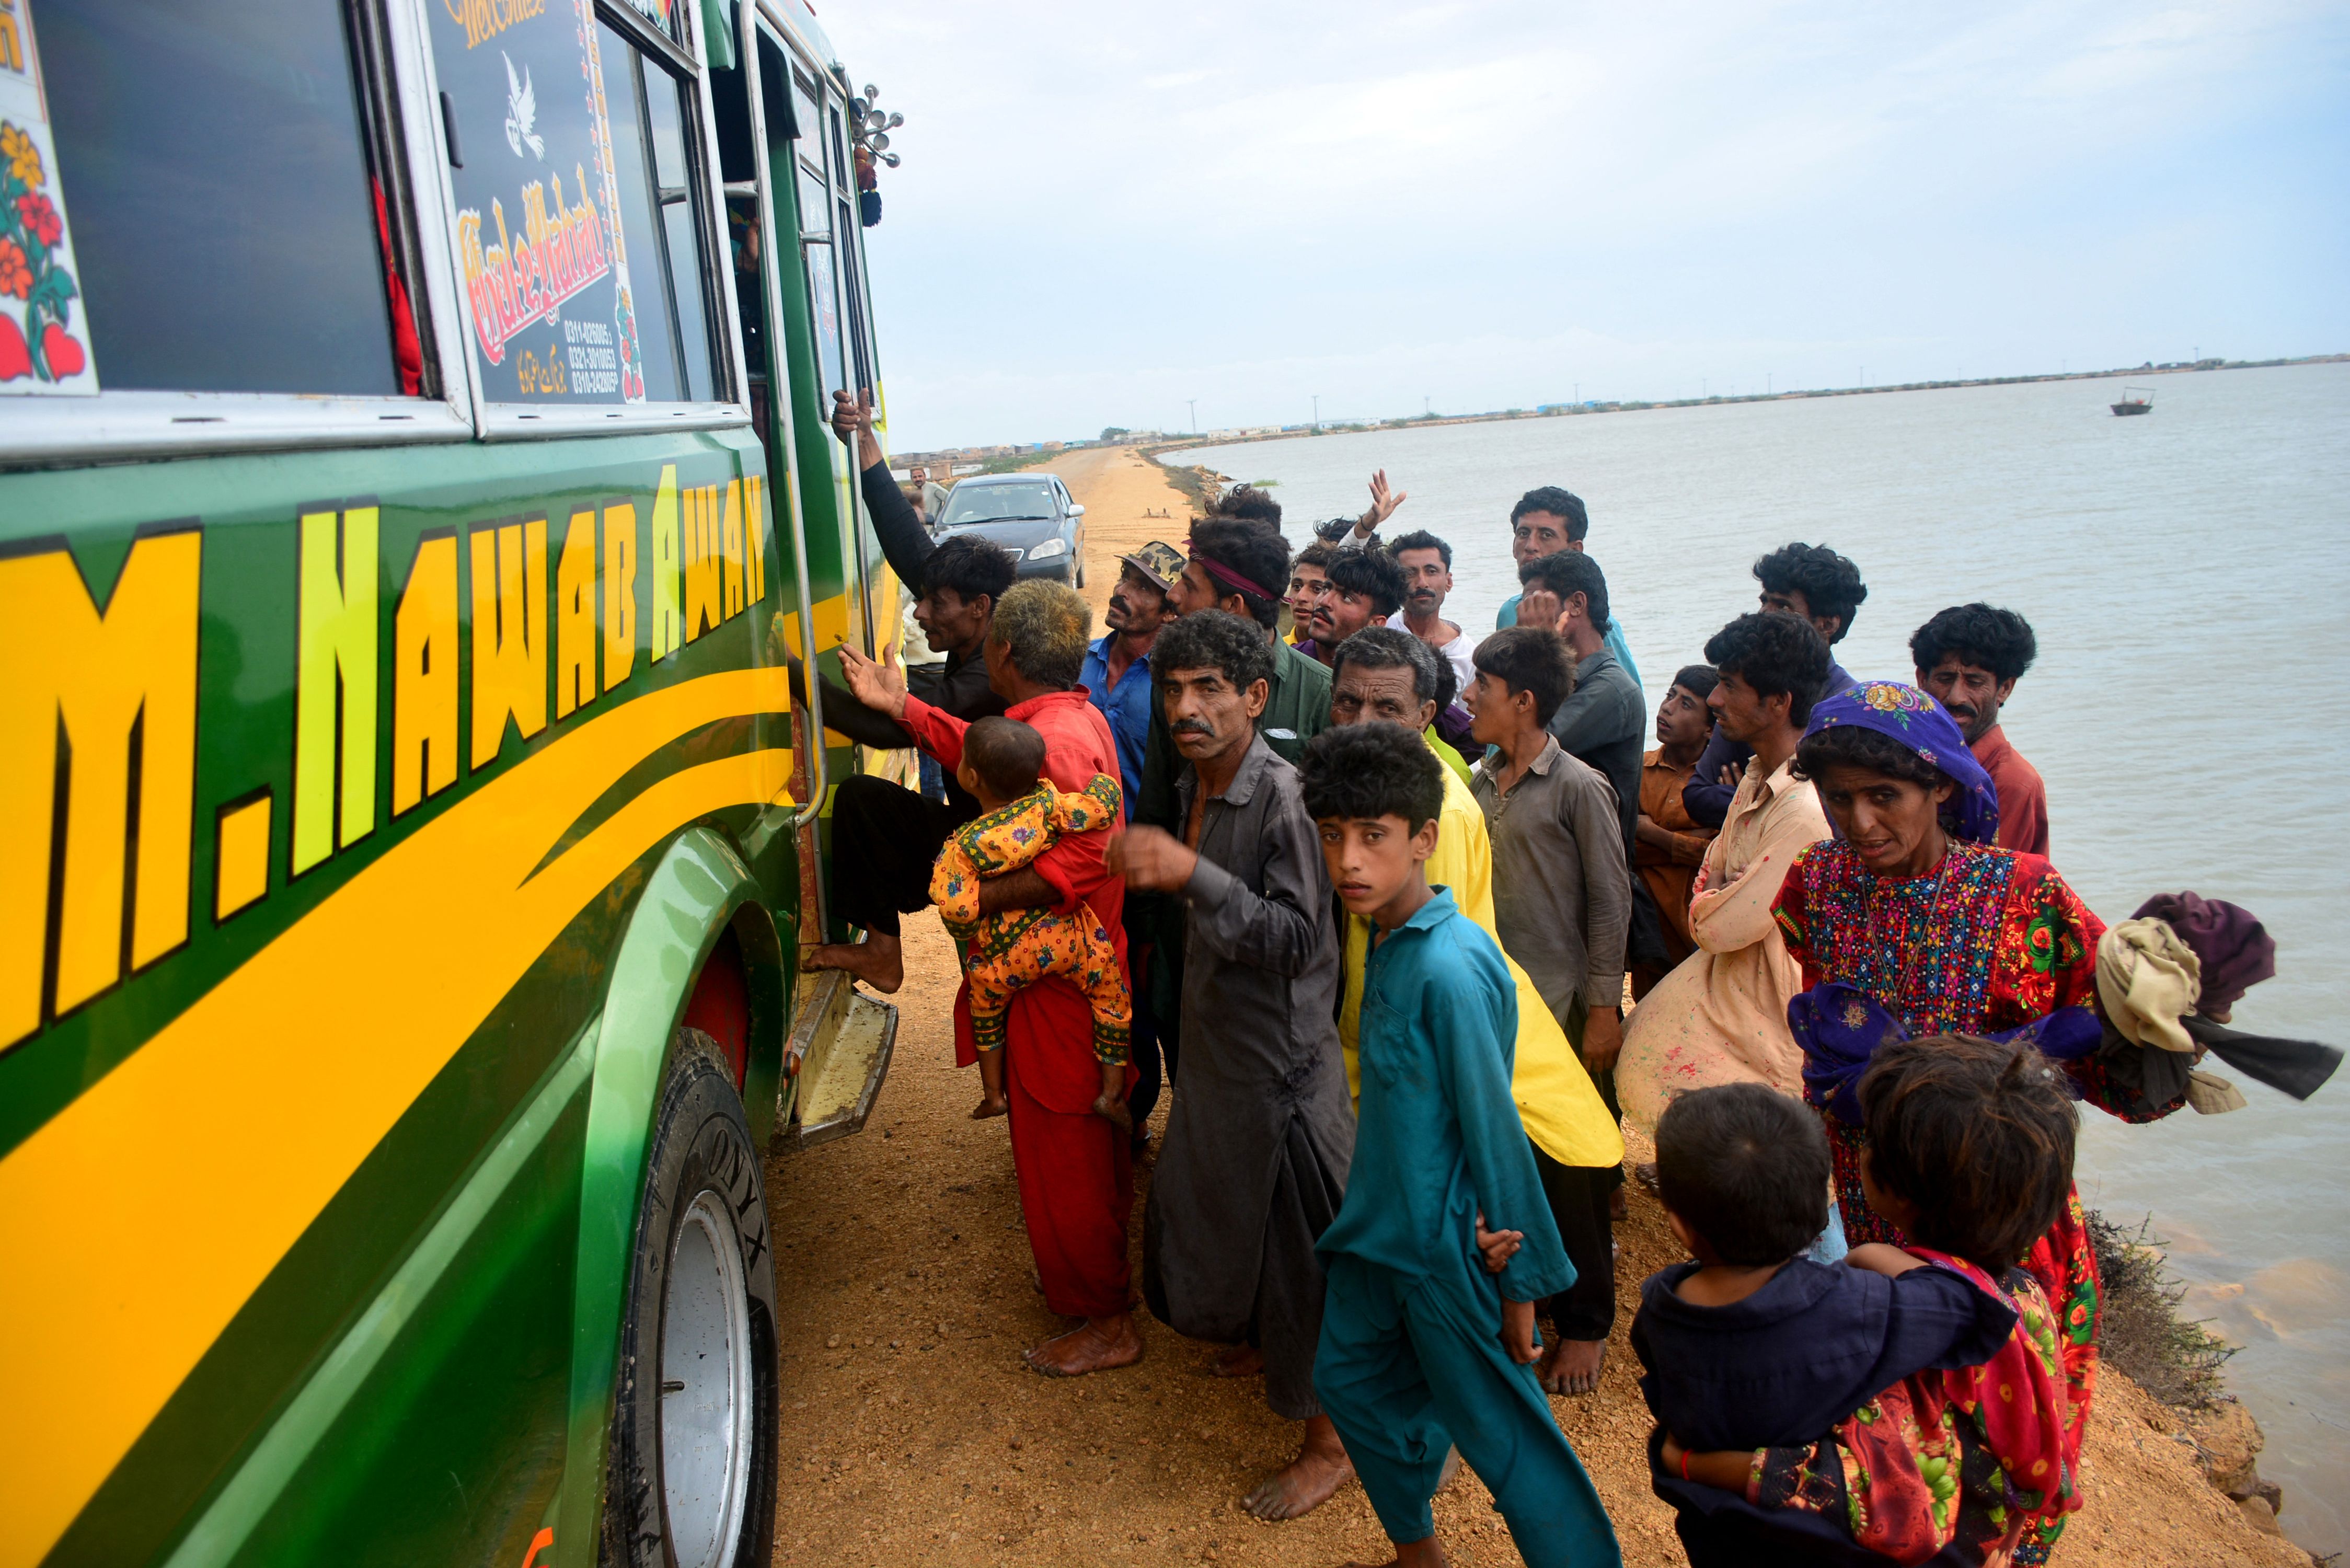 Residents evacuate from a coastal area of Keti Bandar before the due onset of cyclone Biparjoy, in Thatta district of Pakistan’蝉 Sindh